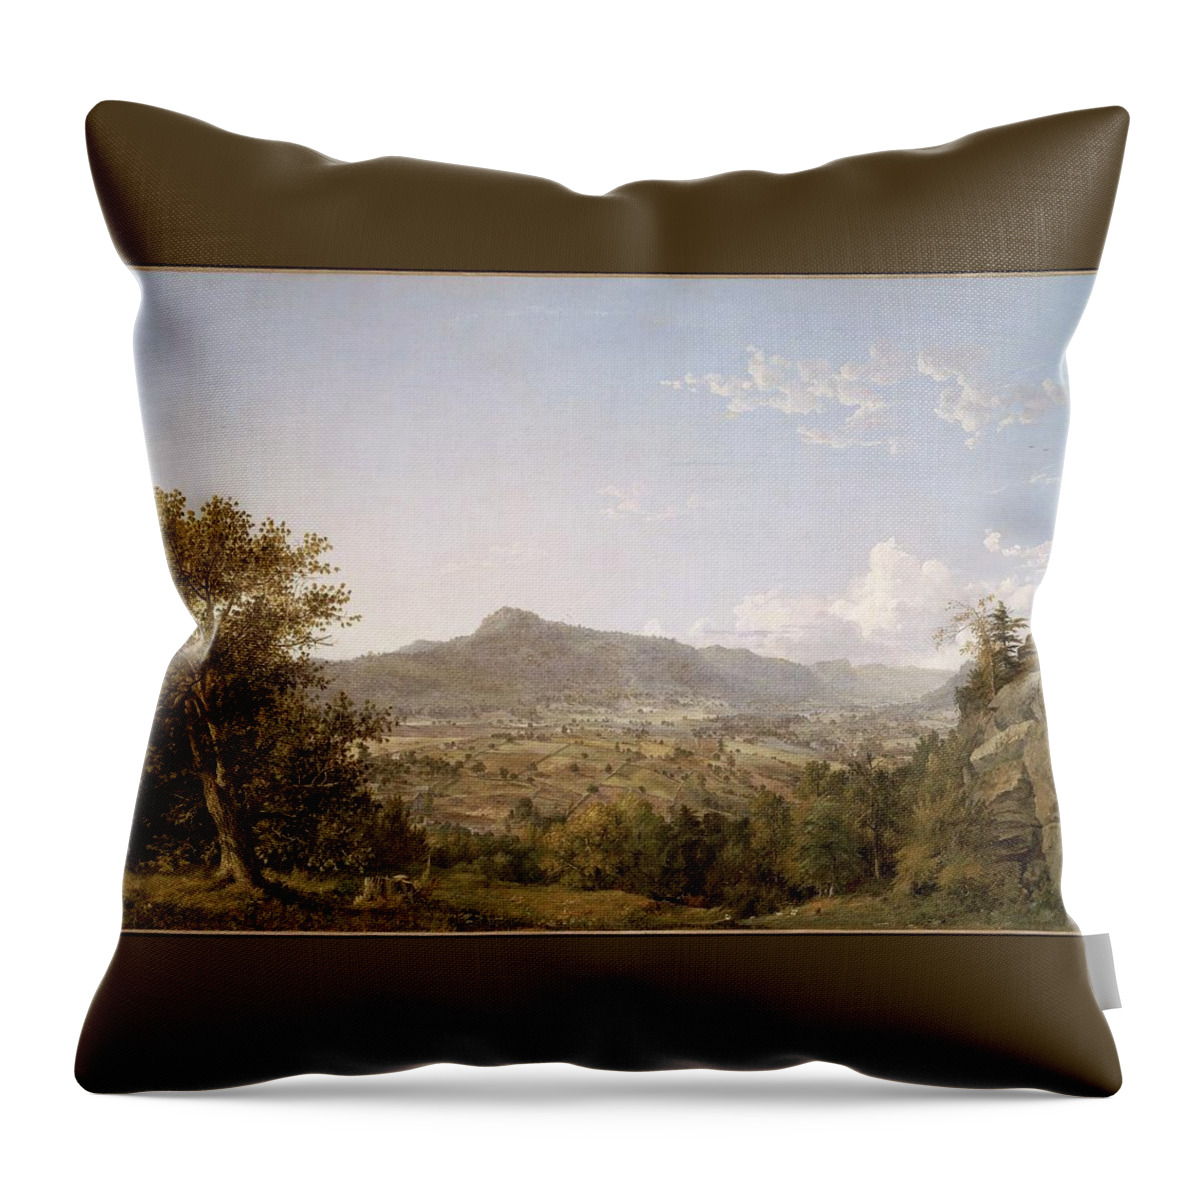 Schatacook Mountain Throw Pillow featuring the painting Housatonic Valley by MotionAge Designs